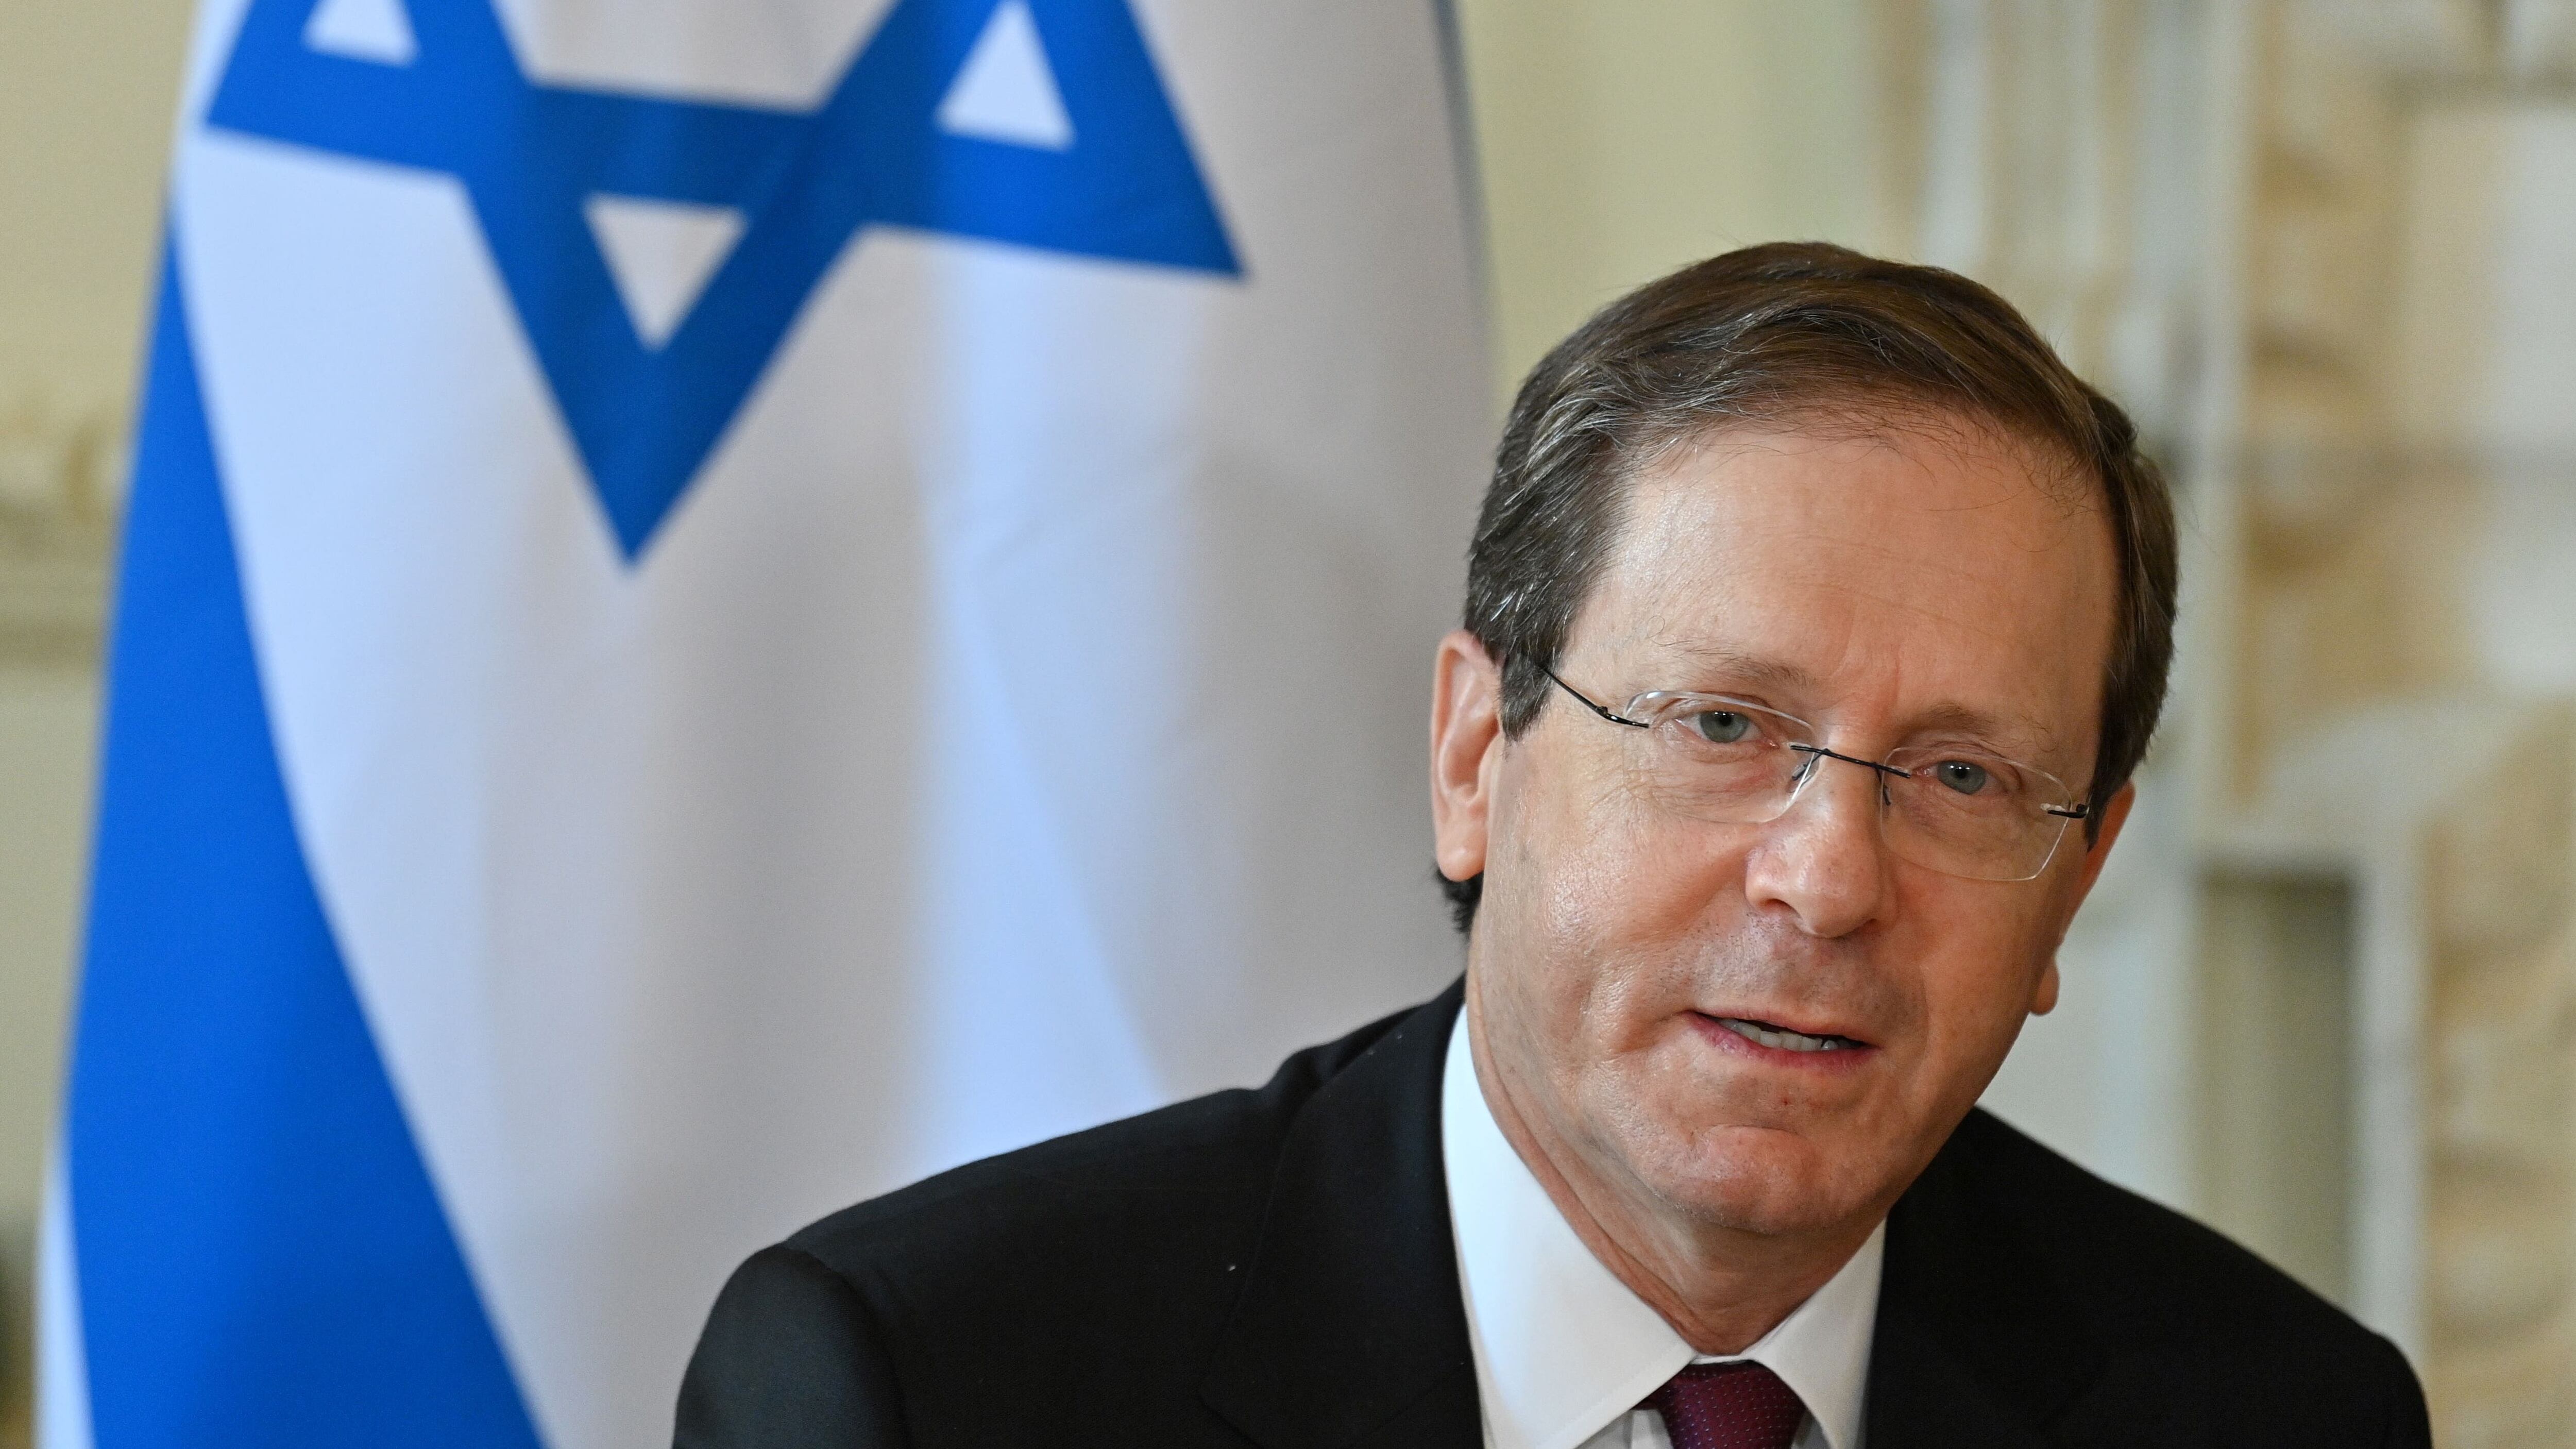 The President of Israel Isaac Herzog has called the BBC coverage of the conflict in the Middle East ‘atrocious’ and a ‘distortion of the facts’ (Justin Tallis/PA)